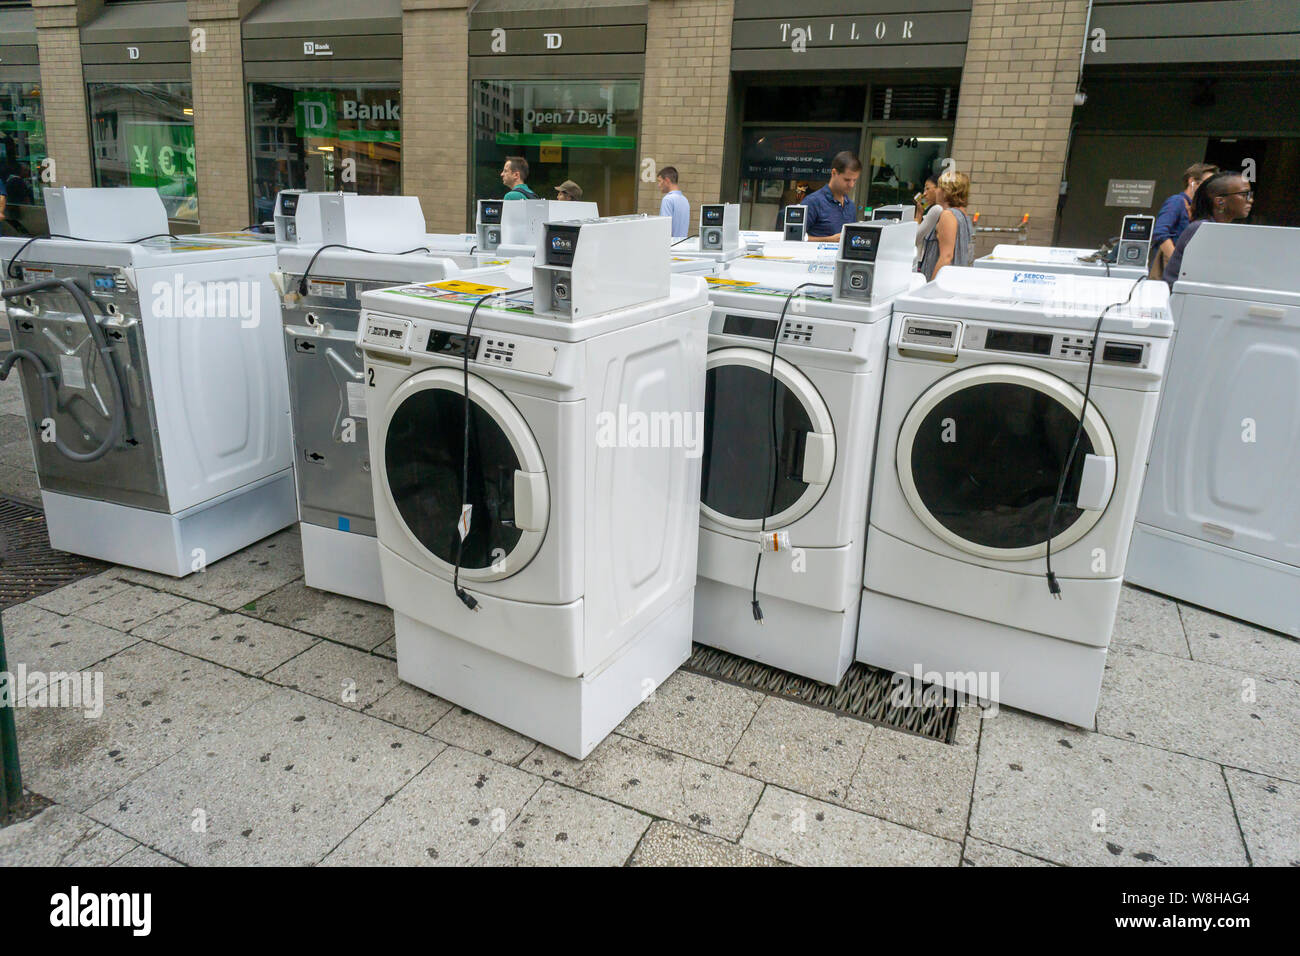 A delivery of Maytag brand washing machines to an apartment building in New York on Tuesday, August 6, 2019. (© Richard B. Levine) Stock Photo